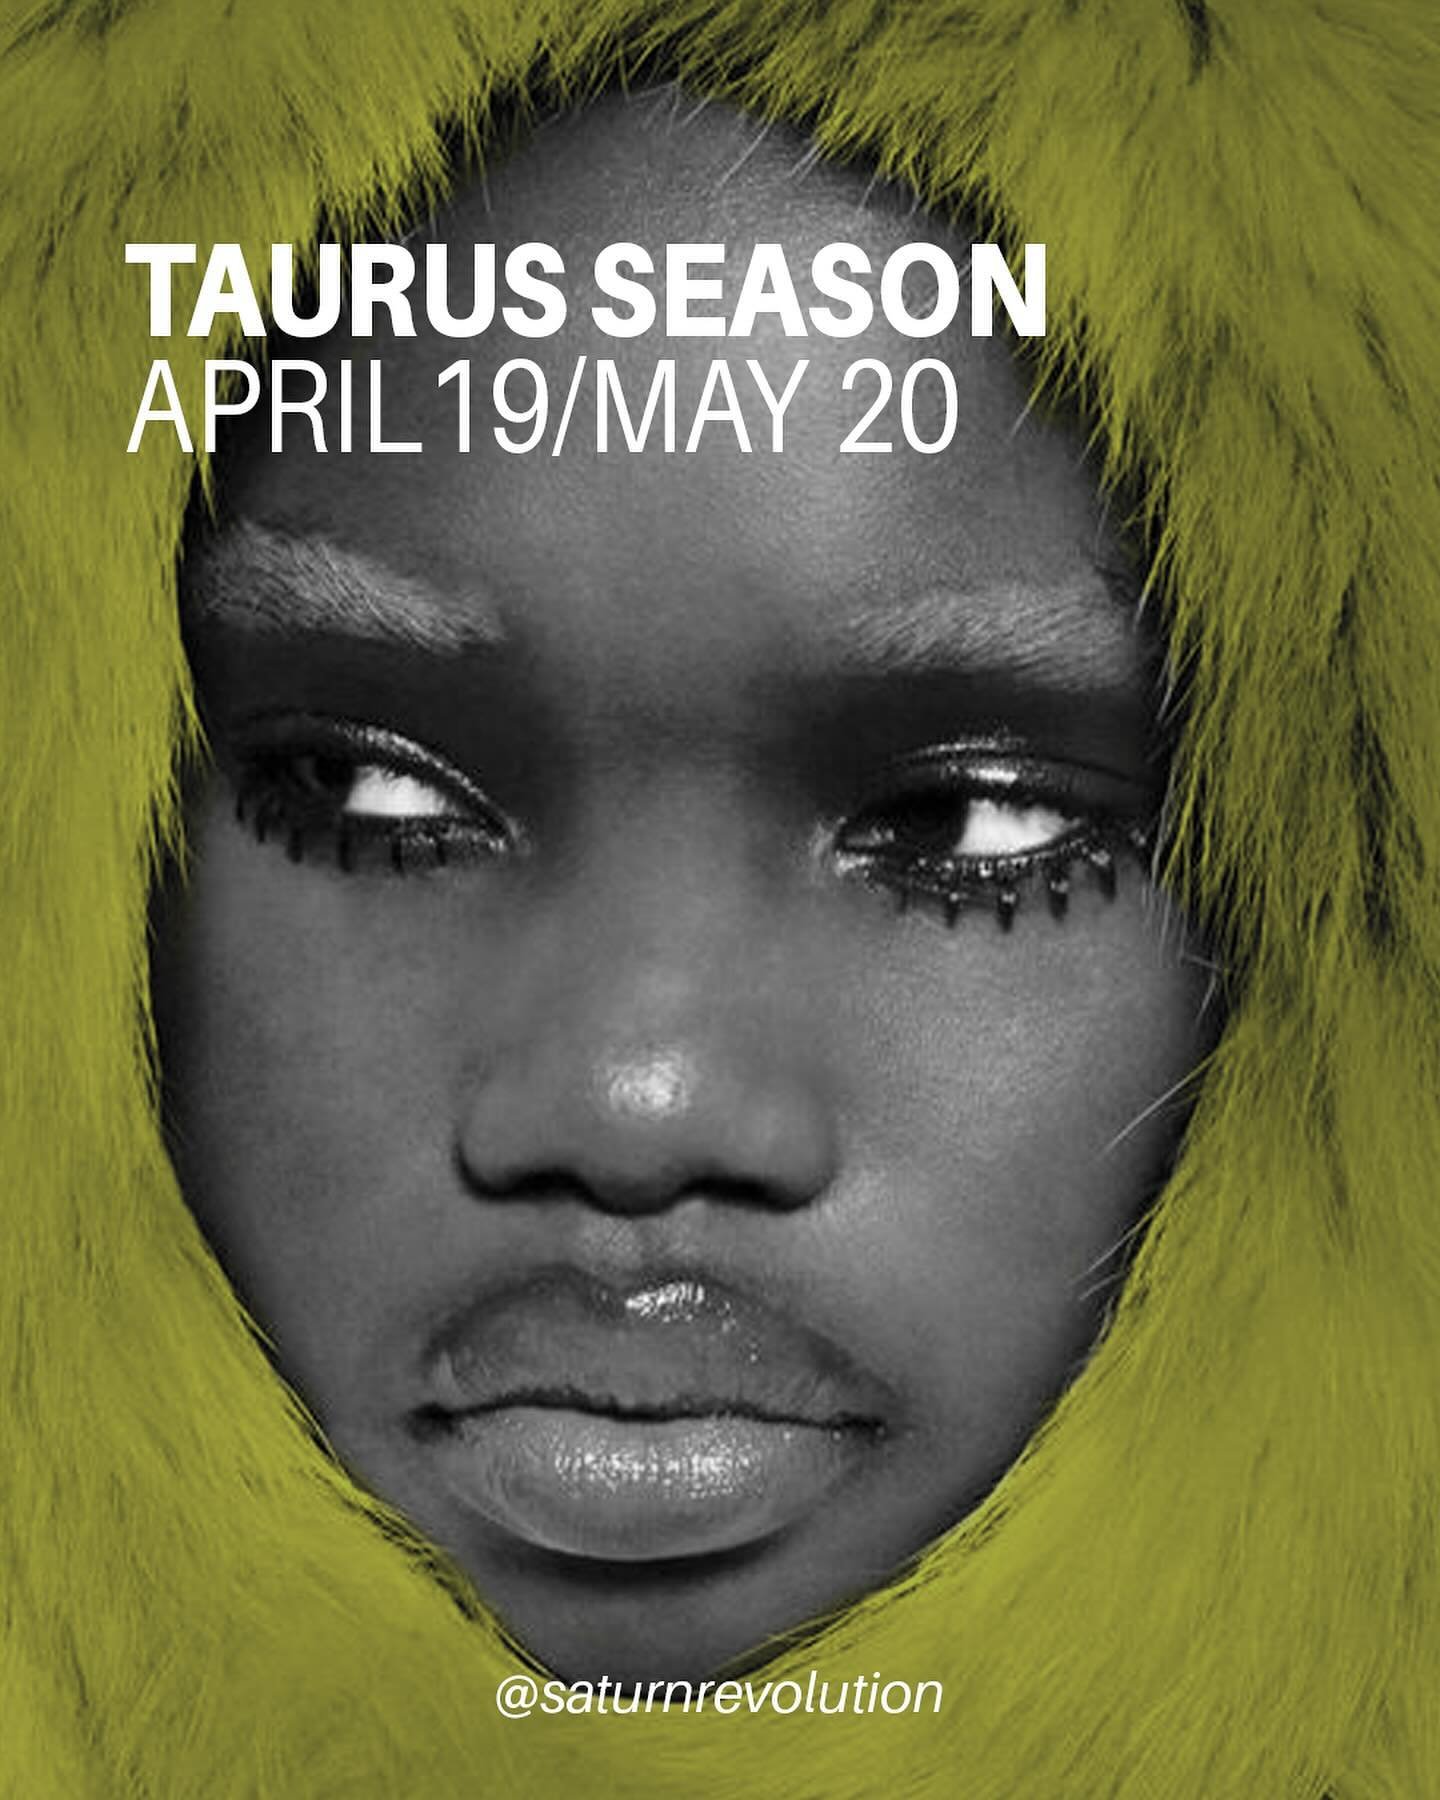 Happy Taurus season ♉️ Here&rsquo;s the breakdown ⬇️

The season dates change every year!! Sometimes it starts earlies, sometimes later depending on the time zone and leap years, same applies to Gemini season. 

🌿April 19 - sun in taurus - we are mo